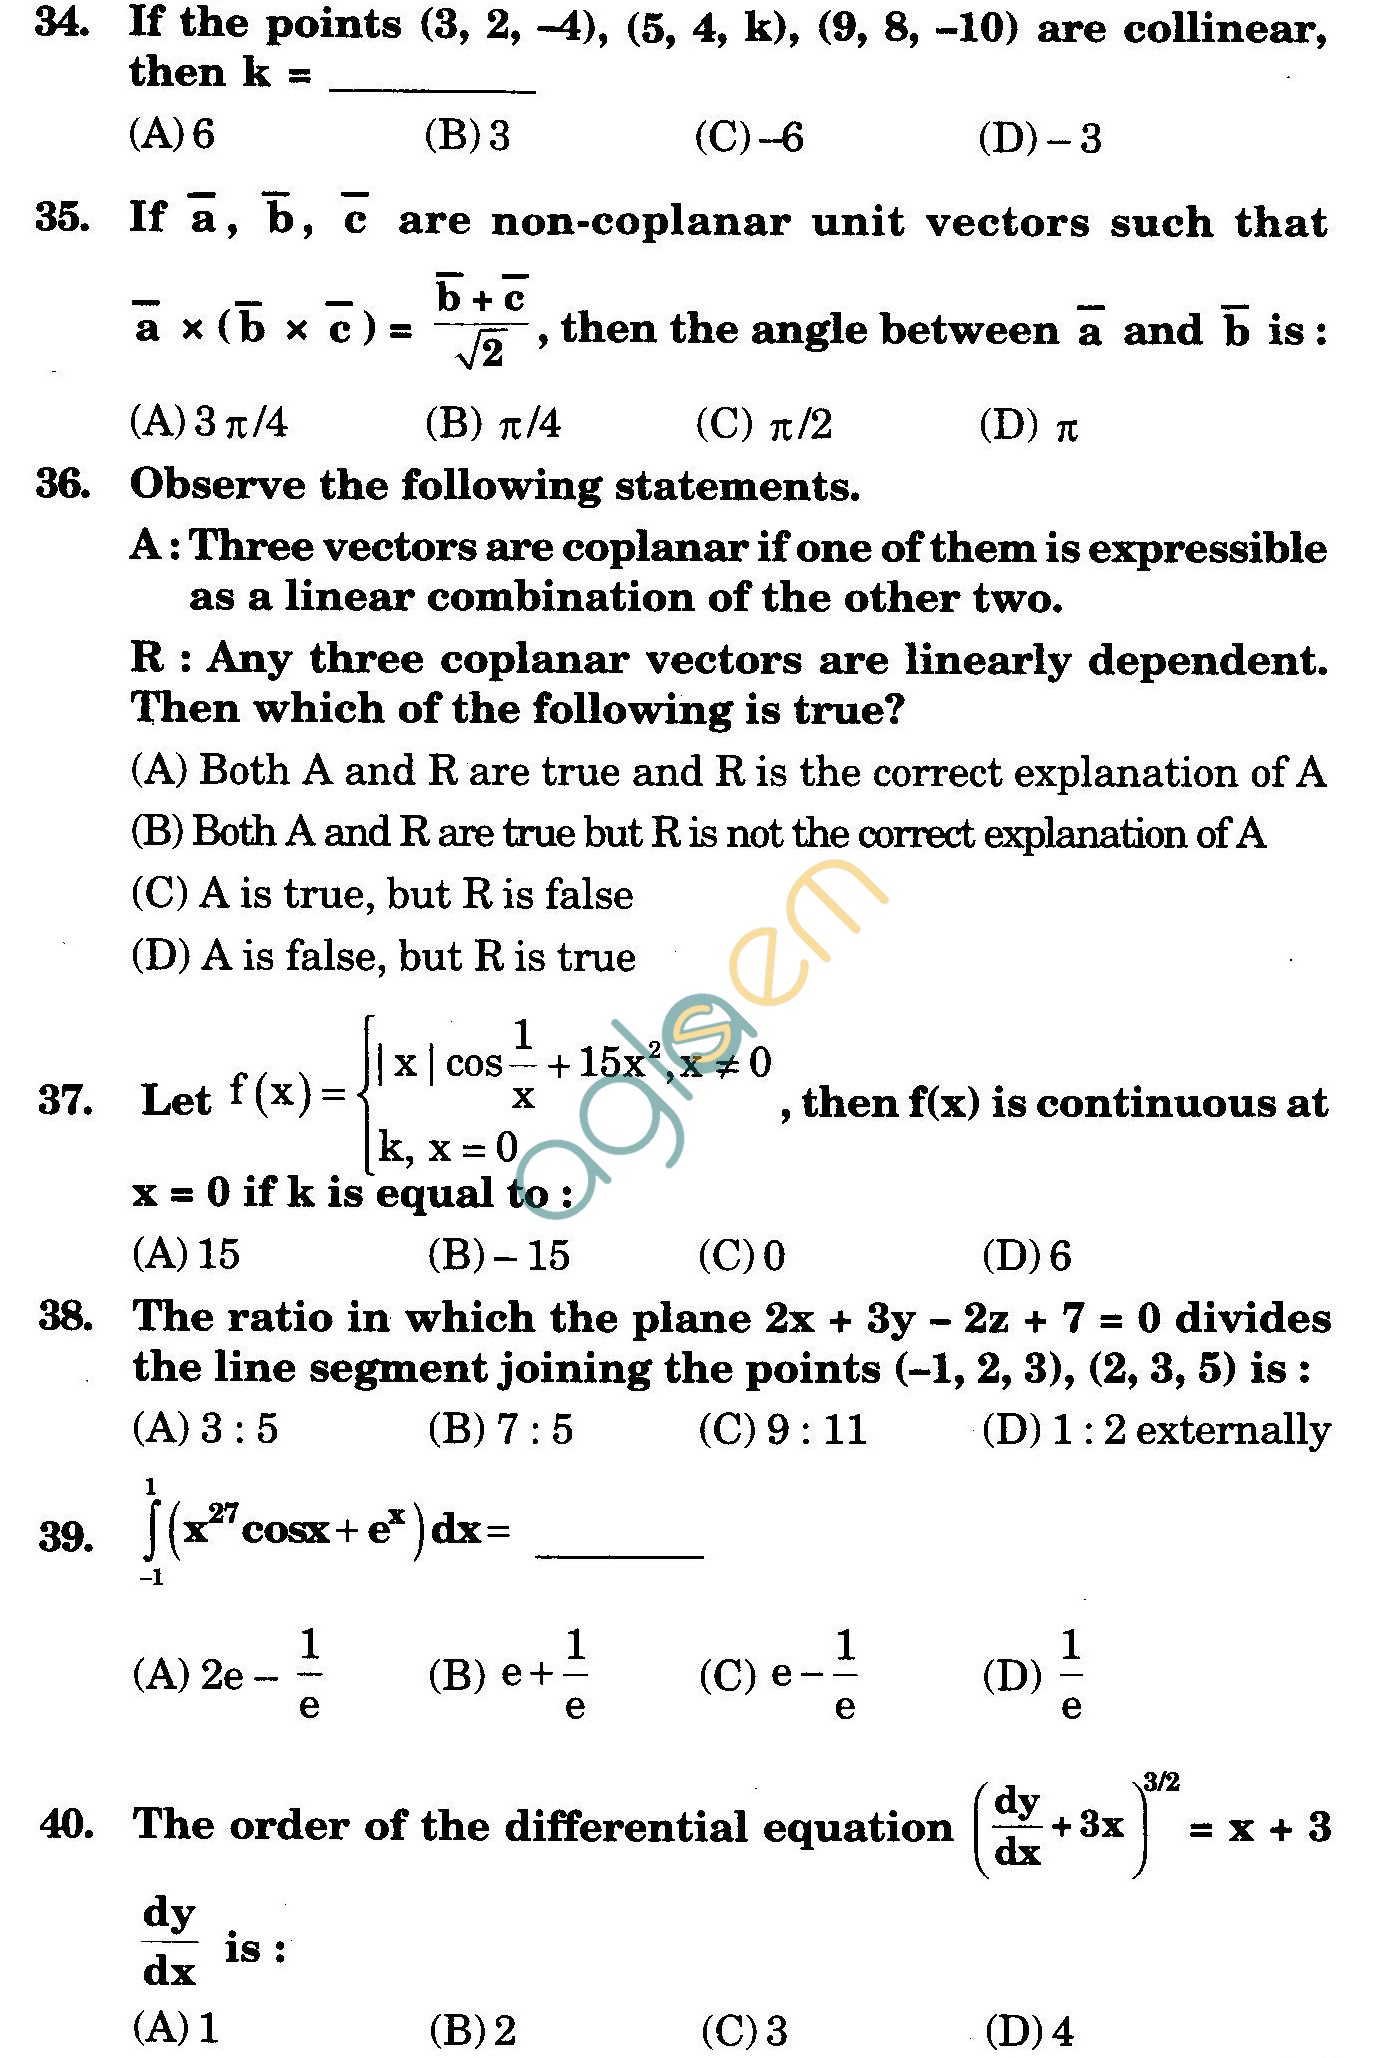 NSTSE 2010 Class XII PCM Question Paper with Answers - Mathematics